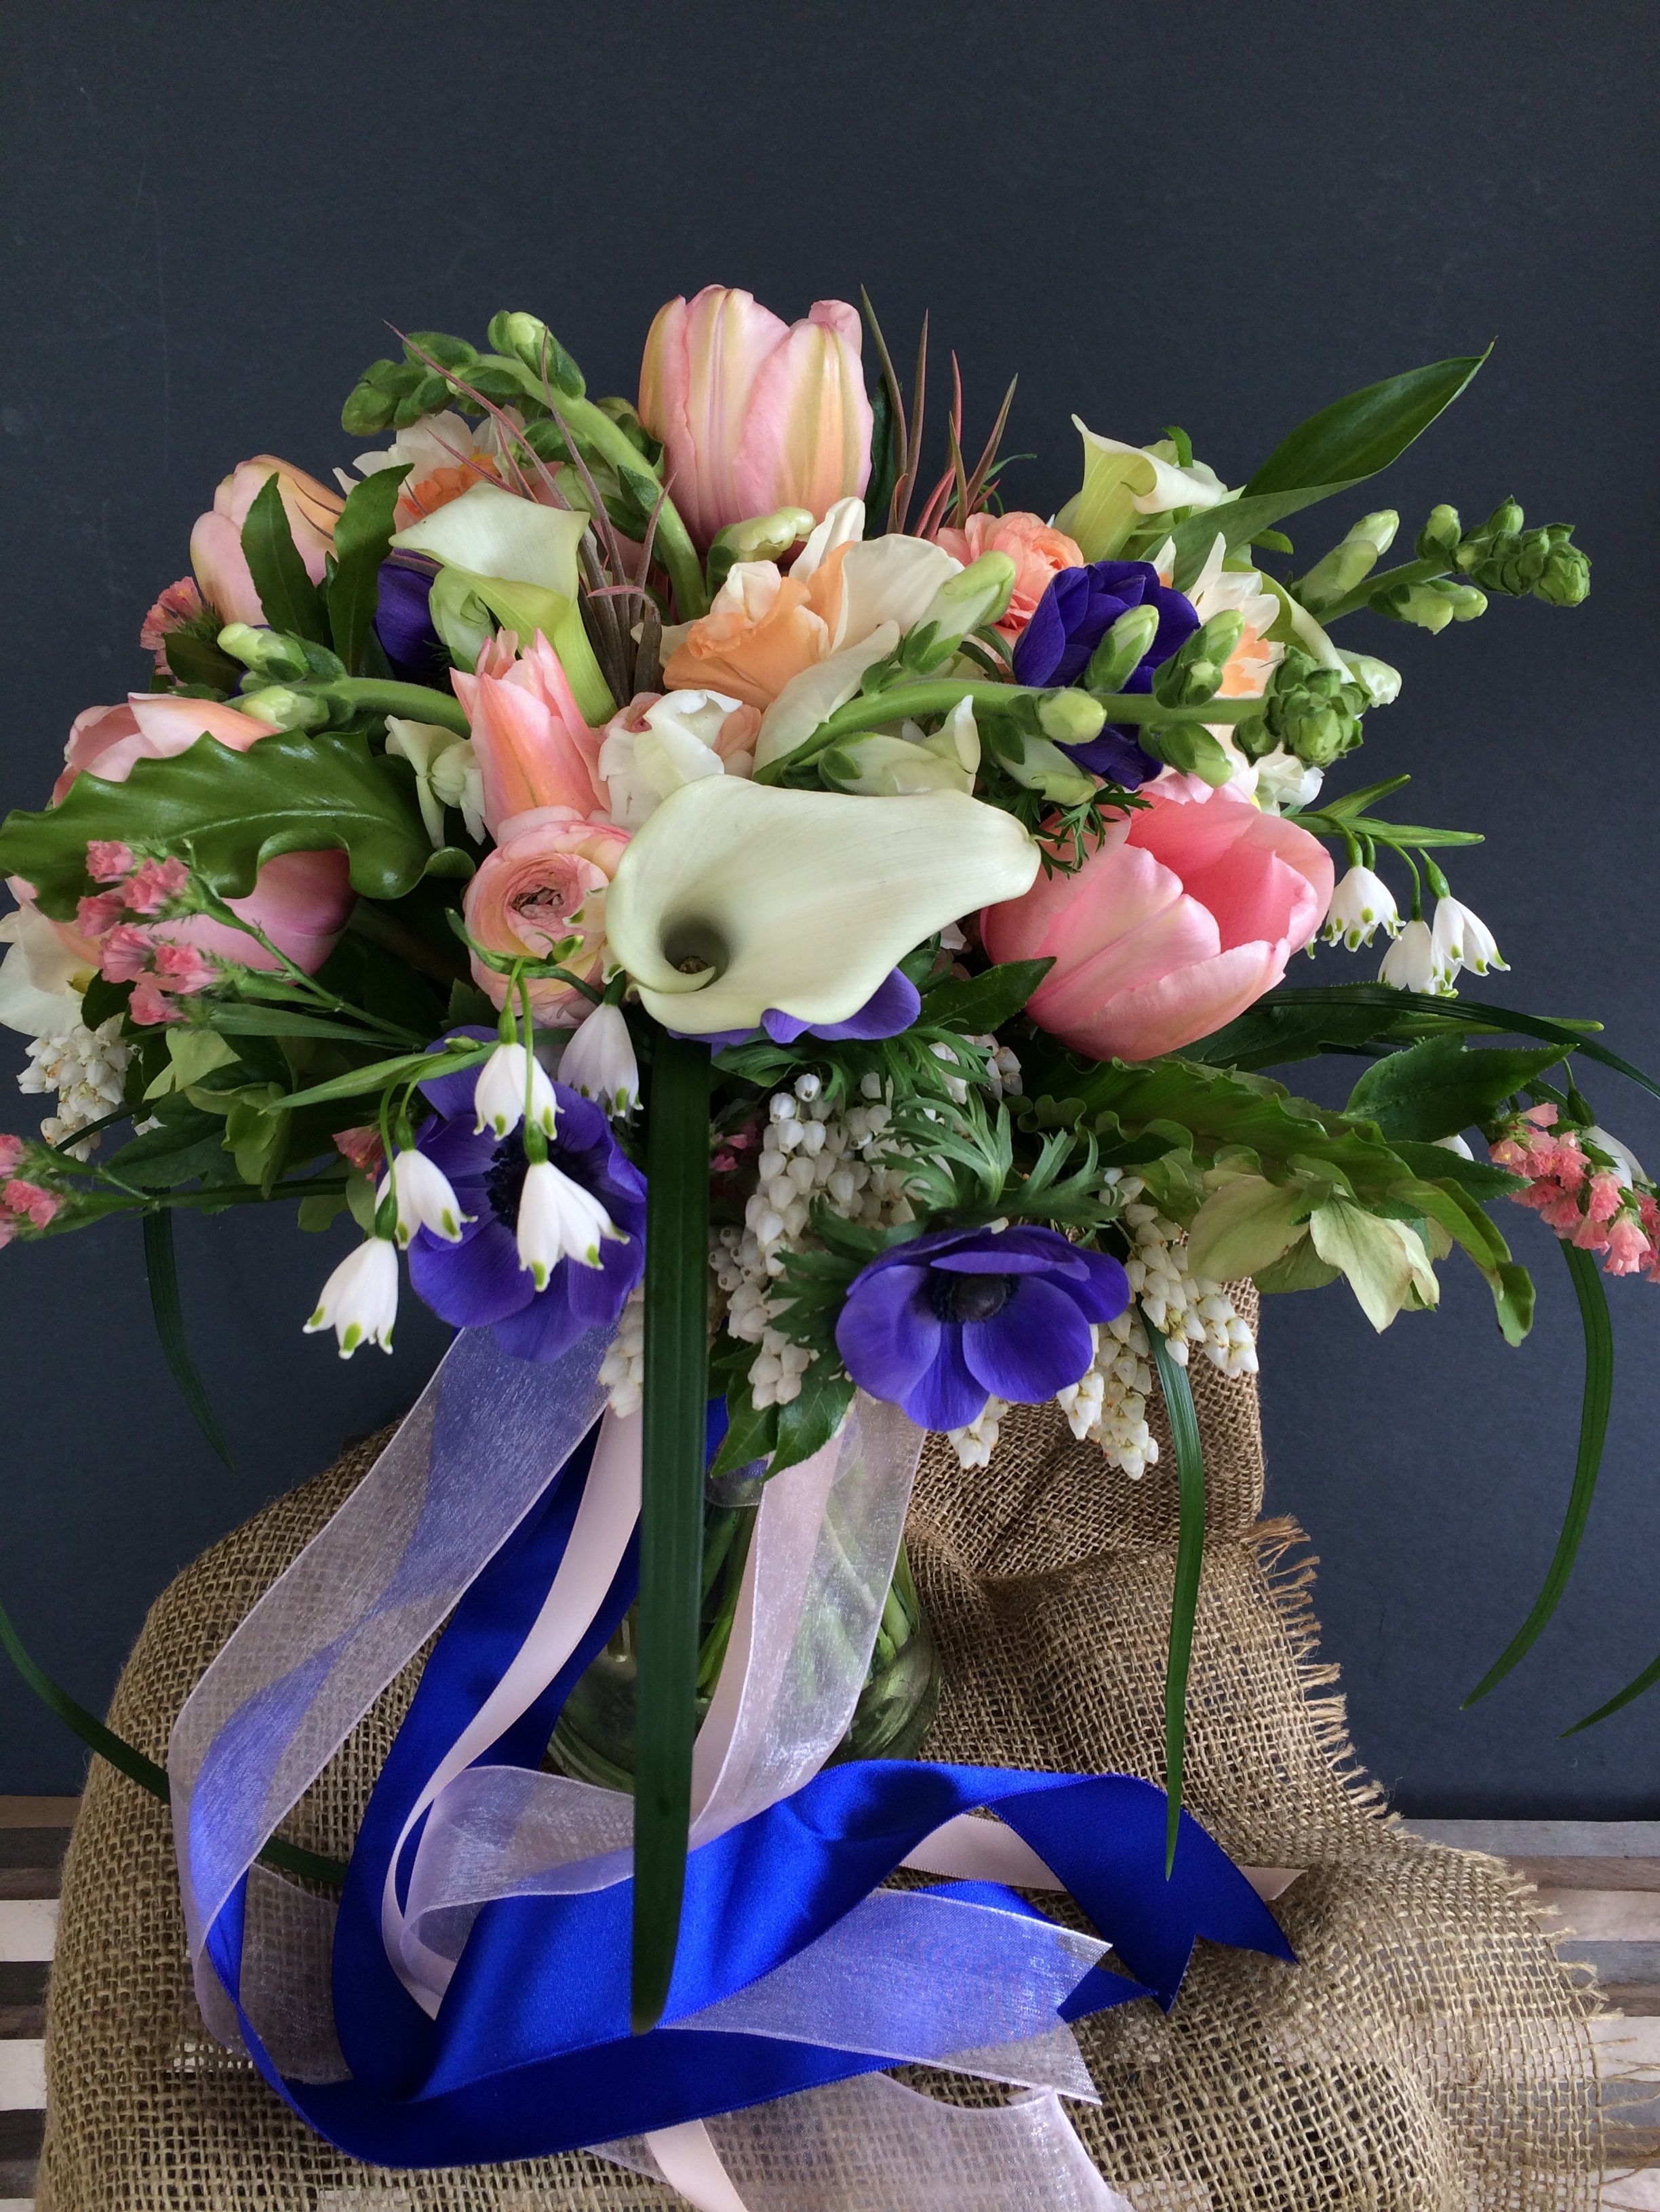 An early spring bridal bouquet of french tulips, peony, anemone, calla lilies and snow drops